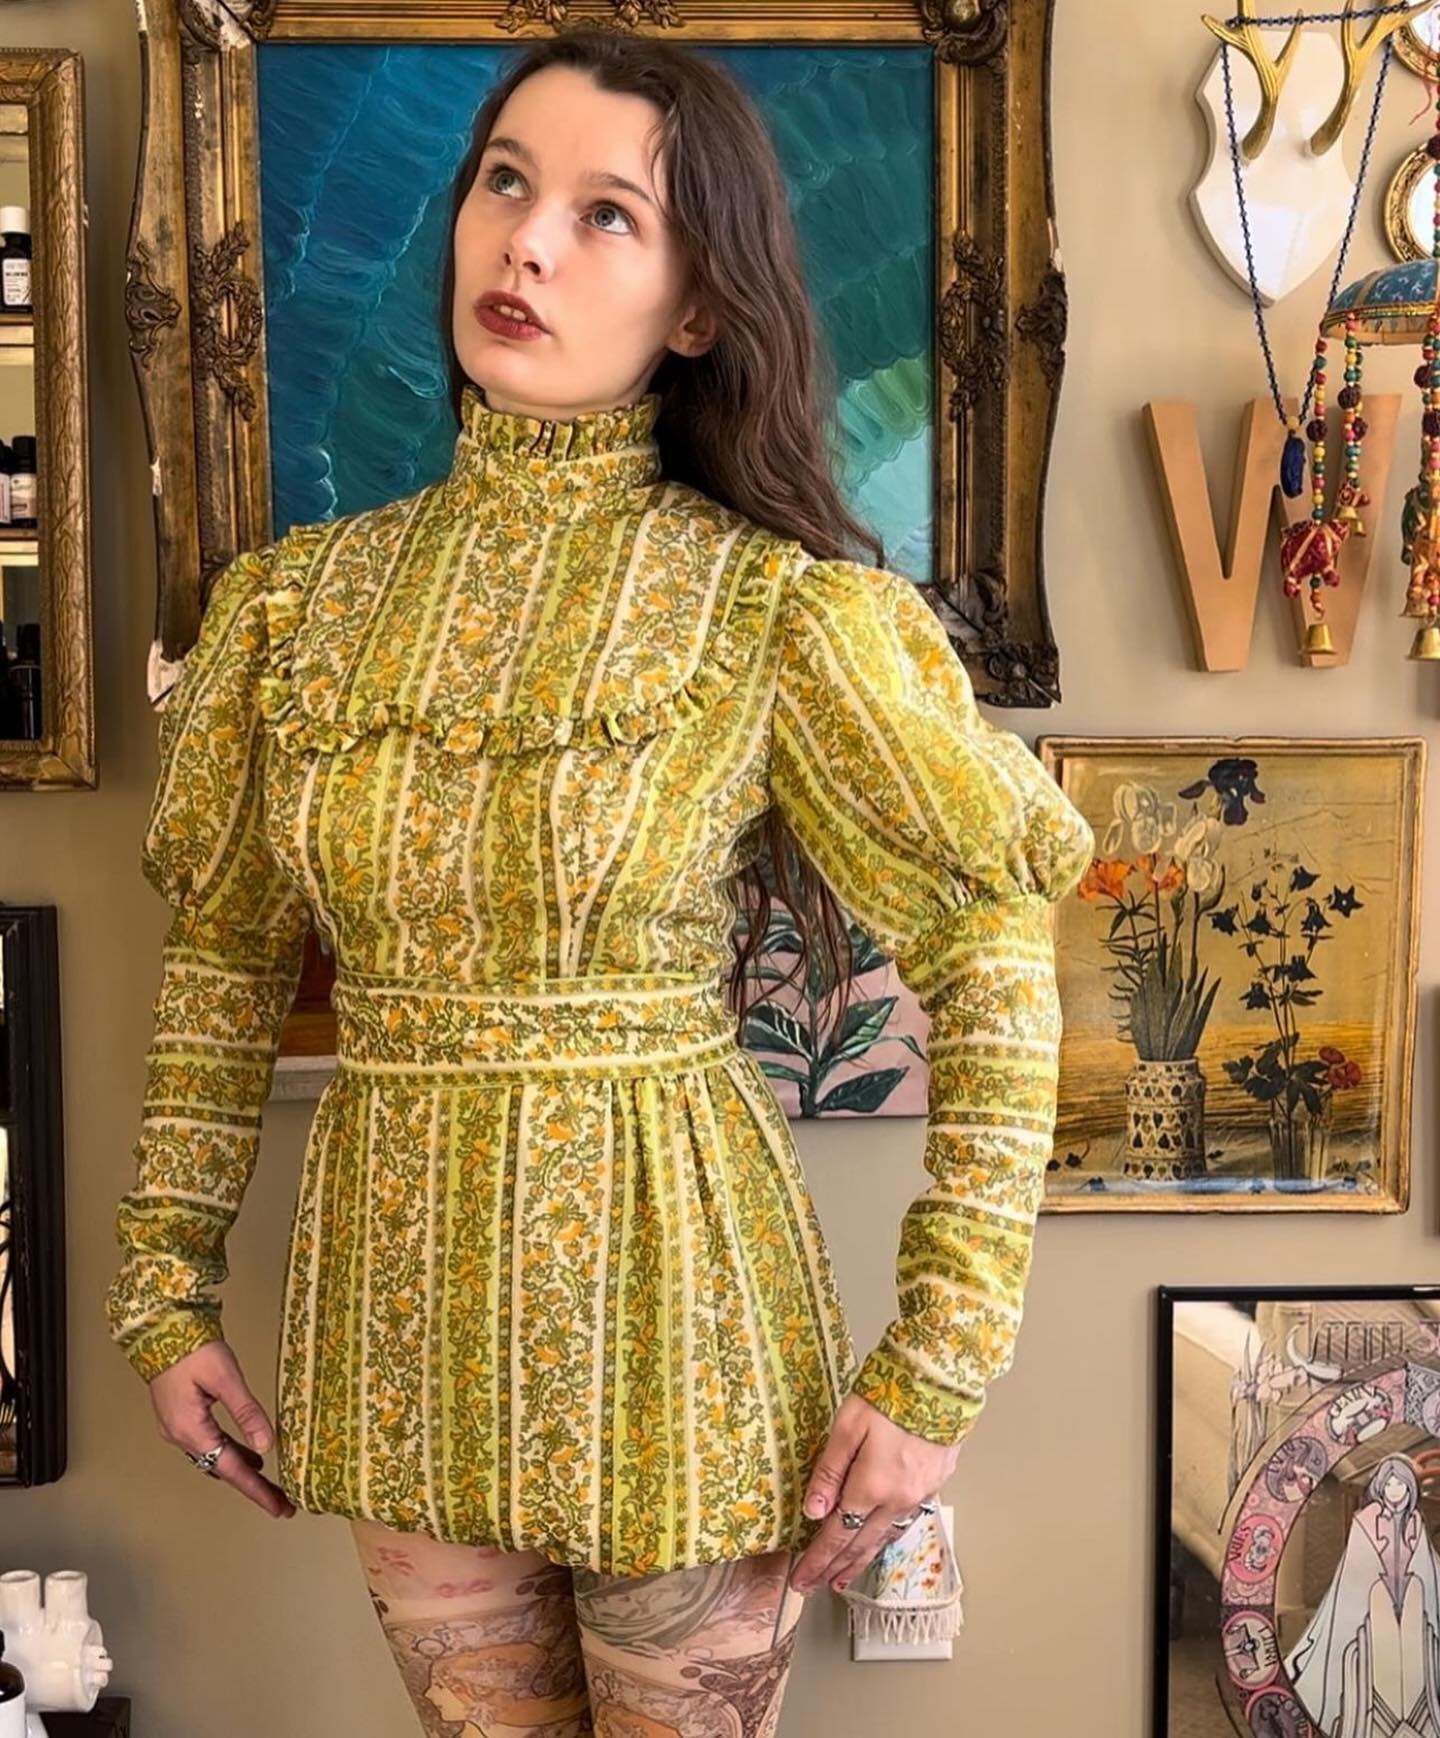 60s &amp; 70s PERFECTION BY @kindredspiritsvintage ❤️WELCOME BACK, JENNA! 

The Baltimore Vintage Expo is a highly curated one-day-only event celebrating the thriving community of exclusively vintage &amp; antique sellers in &amp; around the Maryland